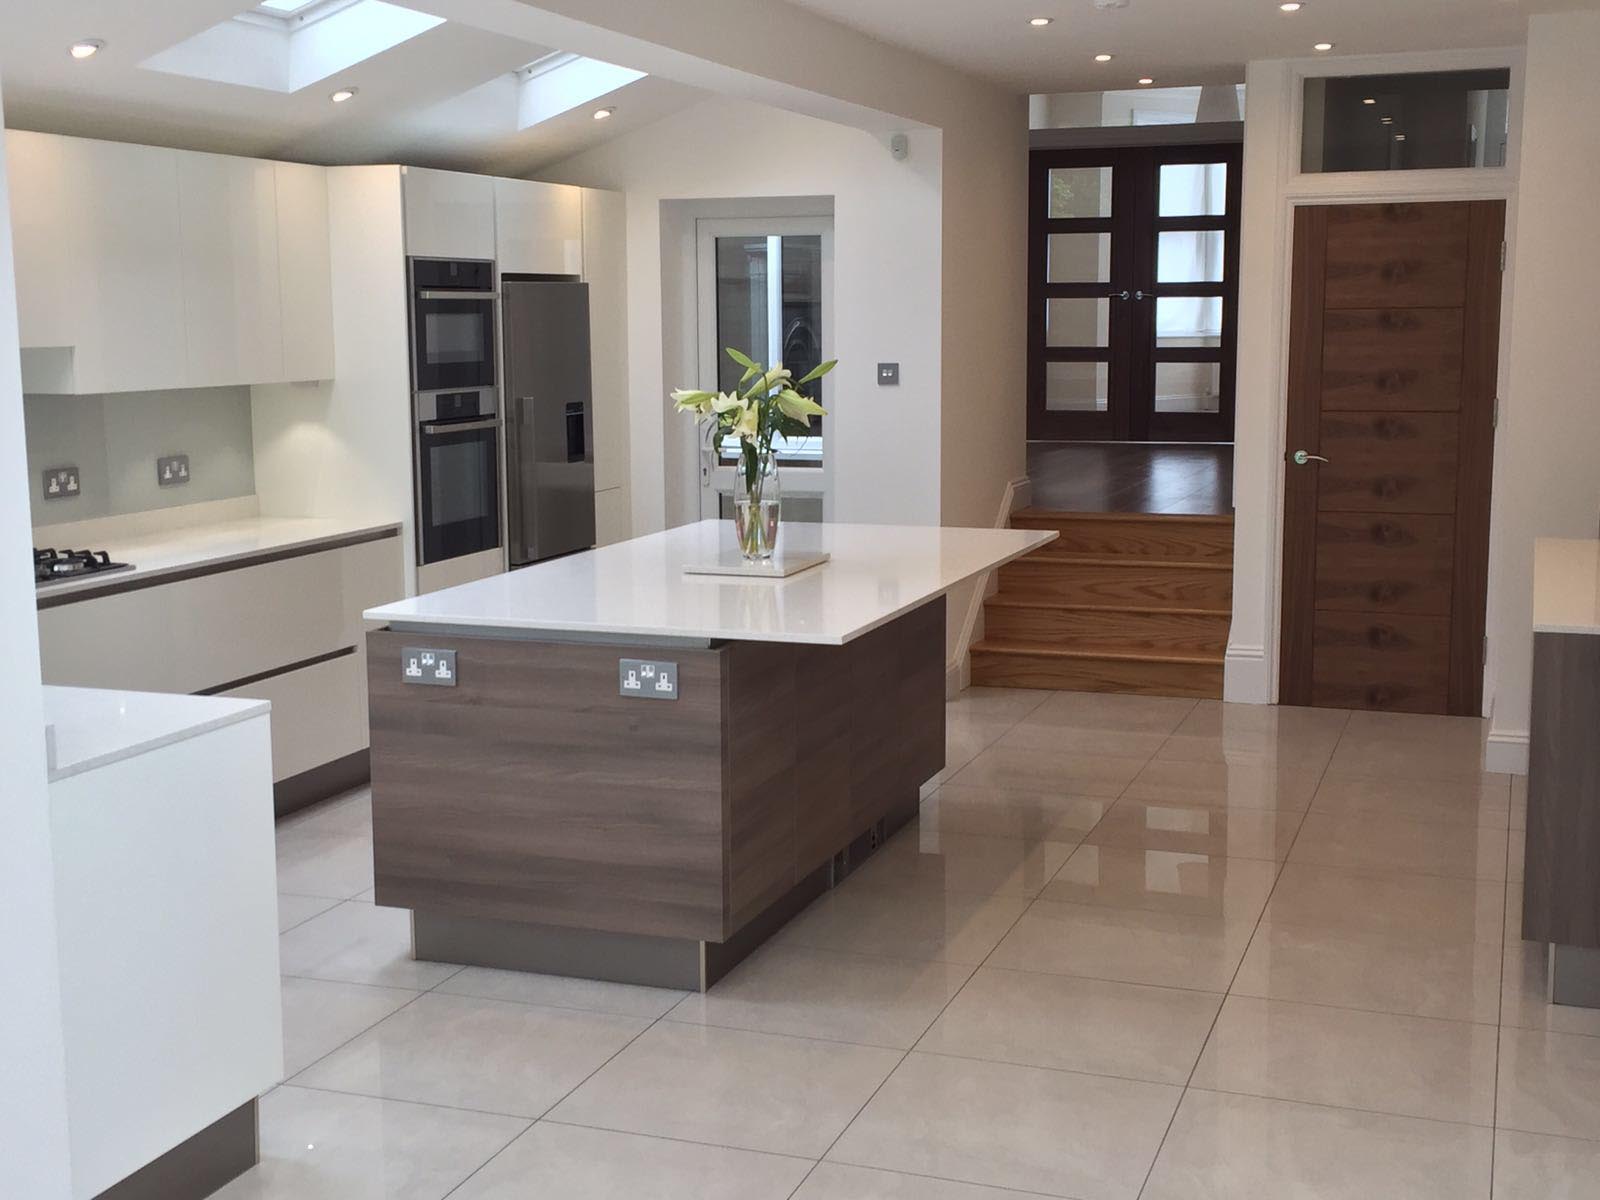 German made kitchen in Golders Green from Hampdens German kitchens and bedrooms